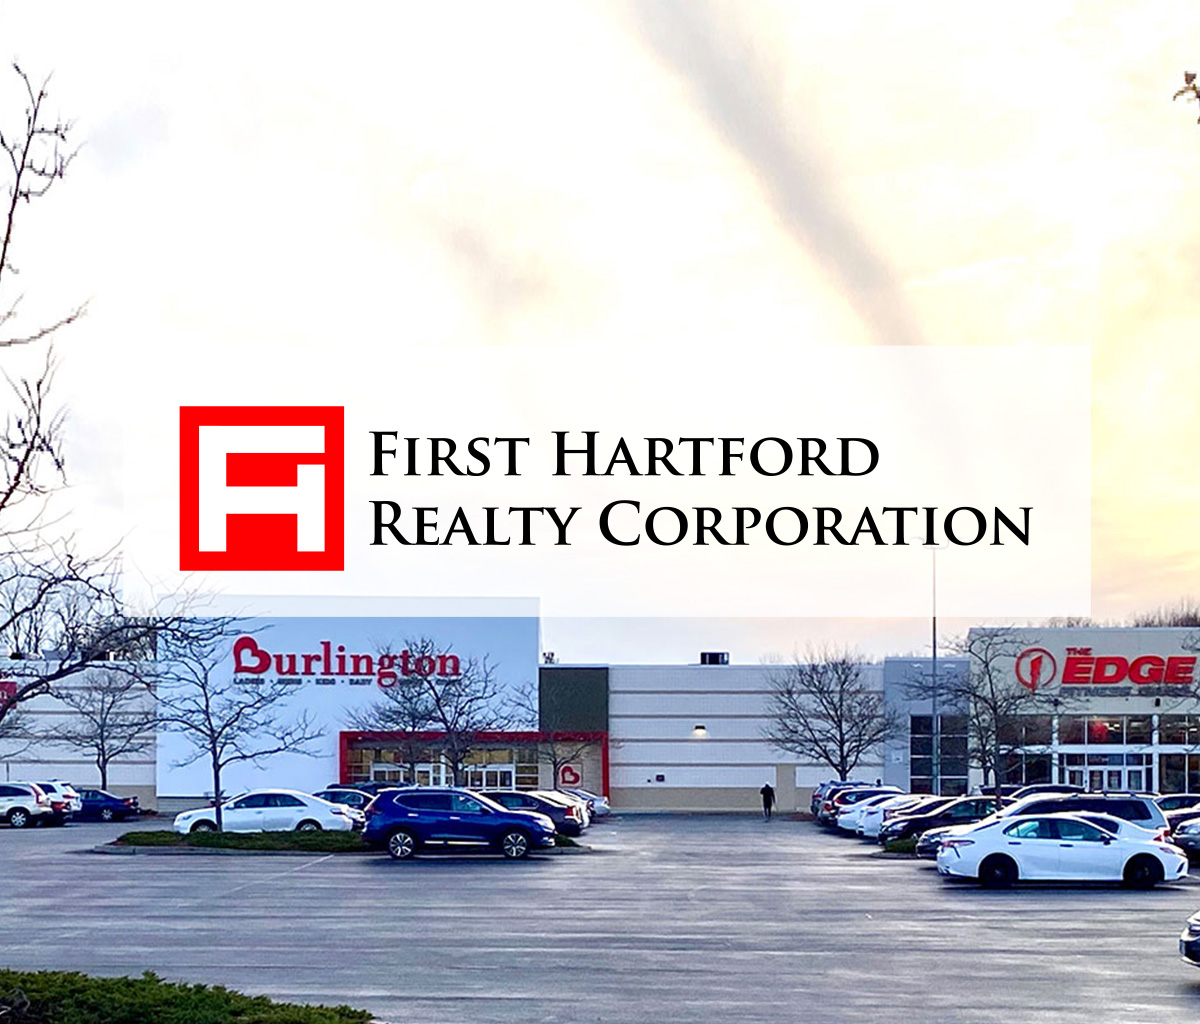 Image of a shopping center with First Hartford logo